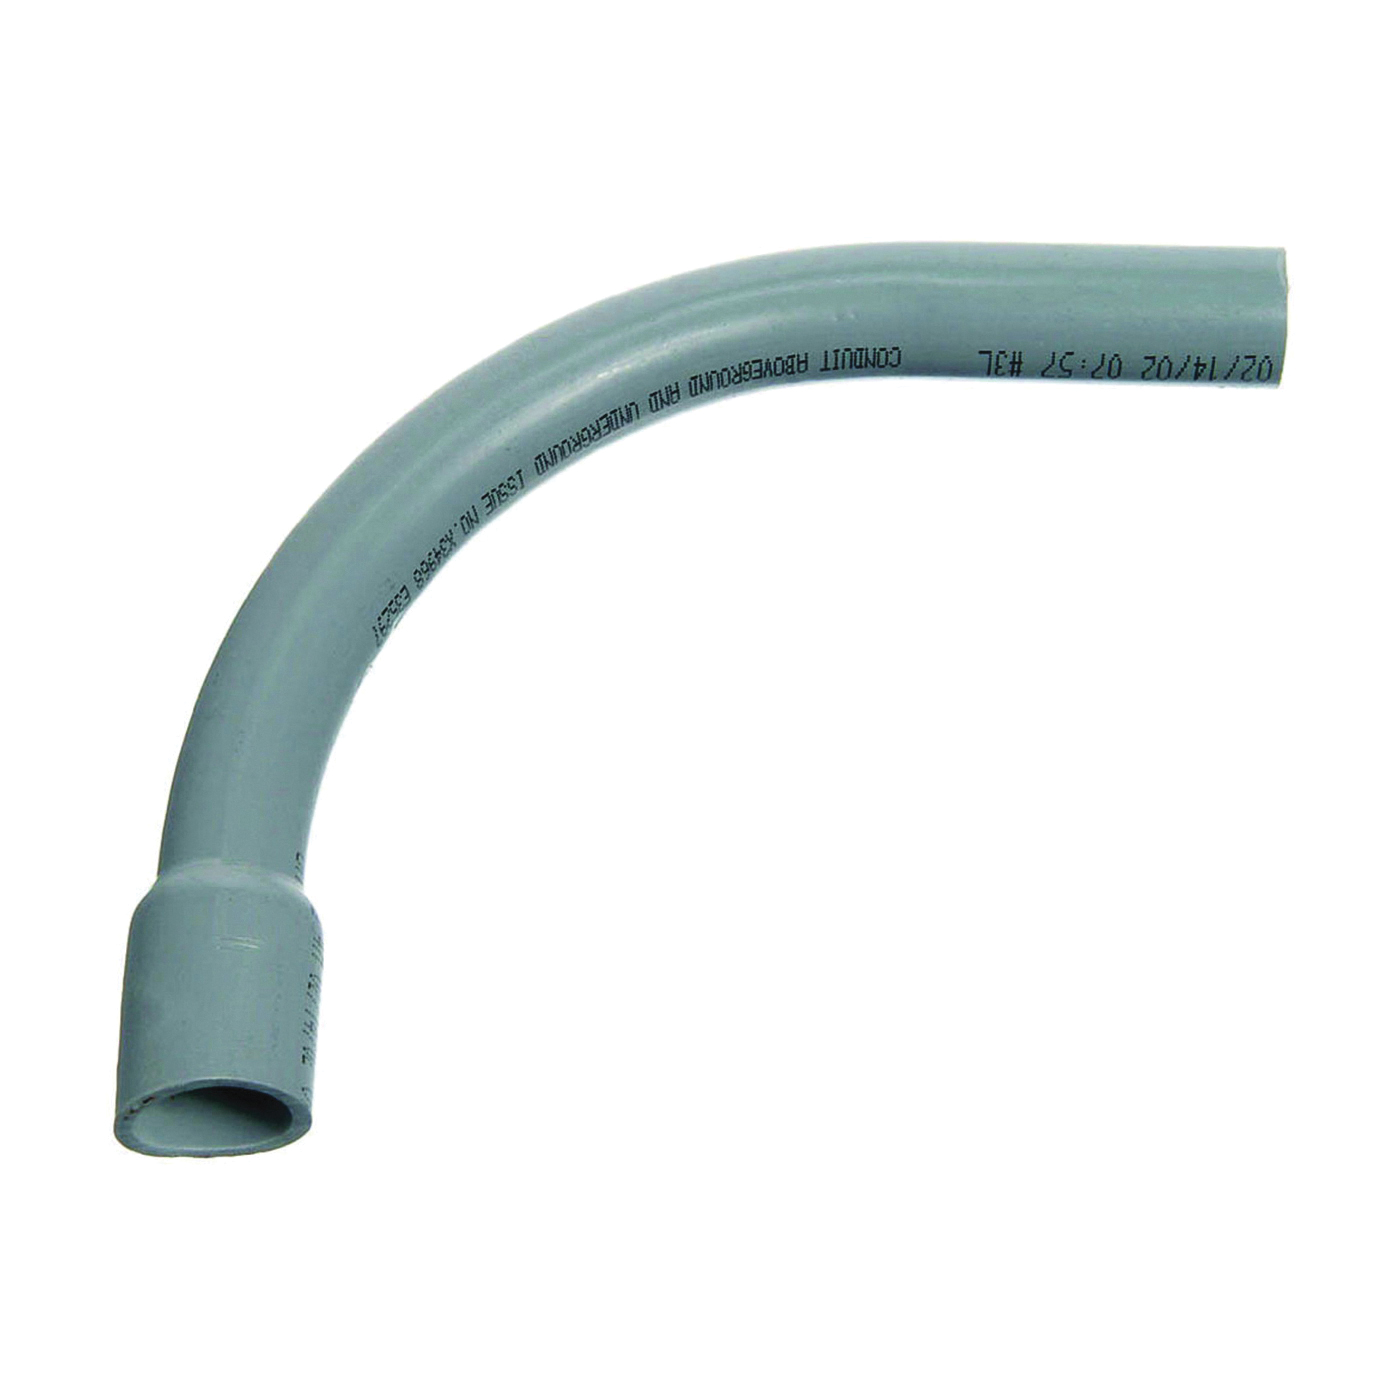 UA9AKB-CAR Elbow, 2-1/2 in Trade Size, 90 deg Angle, SCH 40 Schedule Rating, PVC, Bell End, Gray